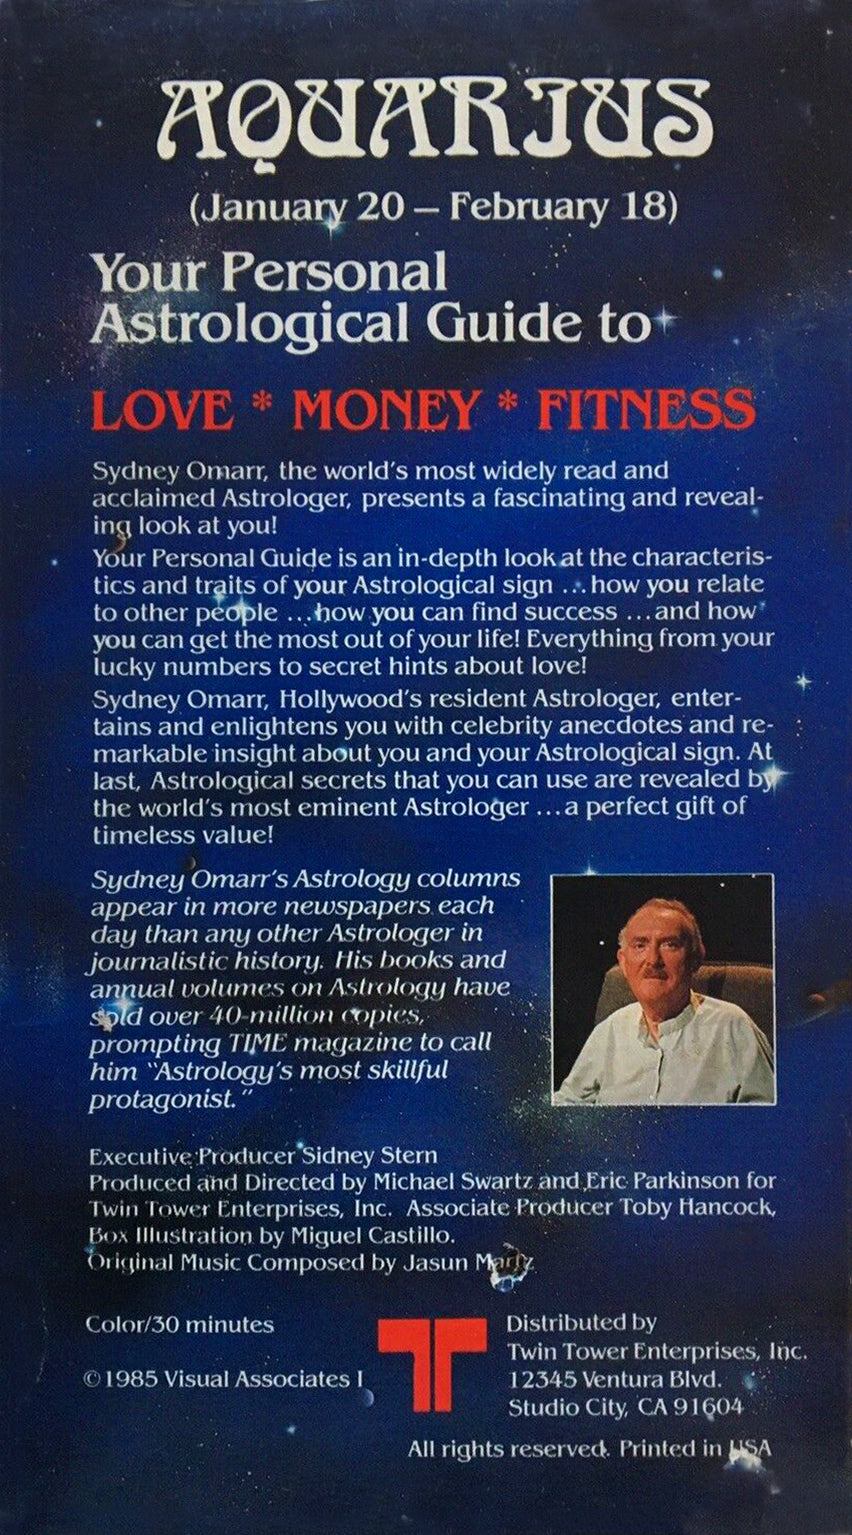 Your Personal Guide to LOVE * MONEY * FITNESS Starring Sydney Omarr